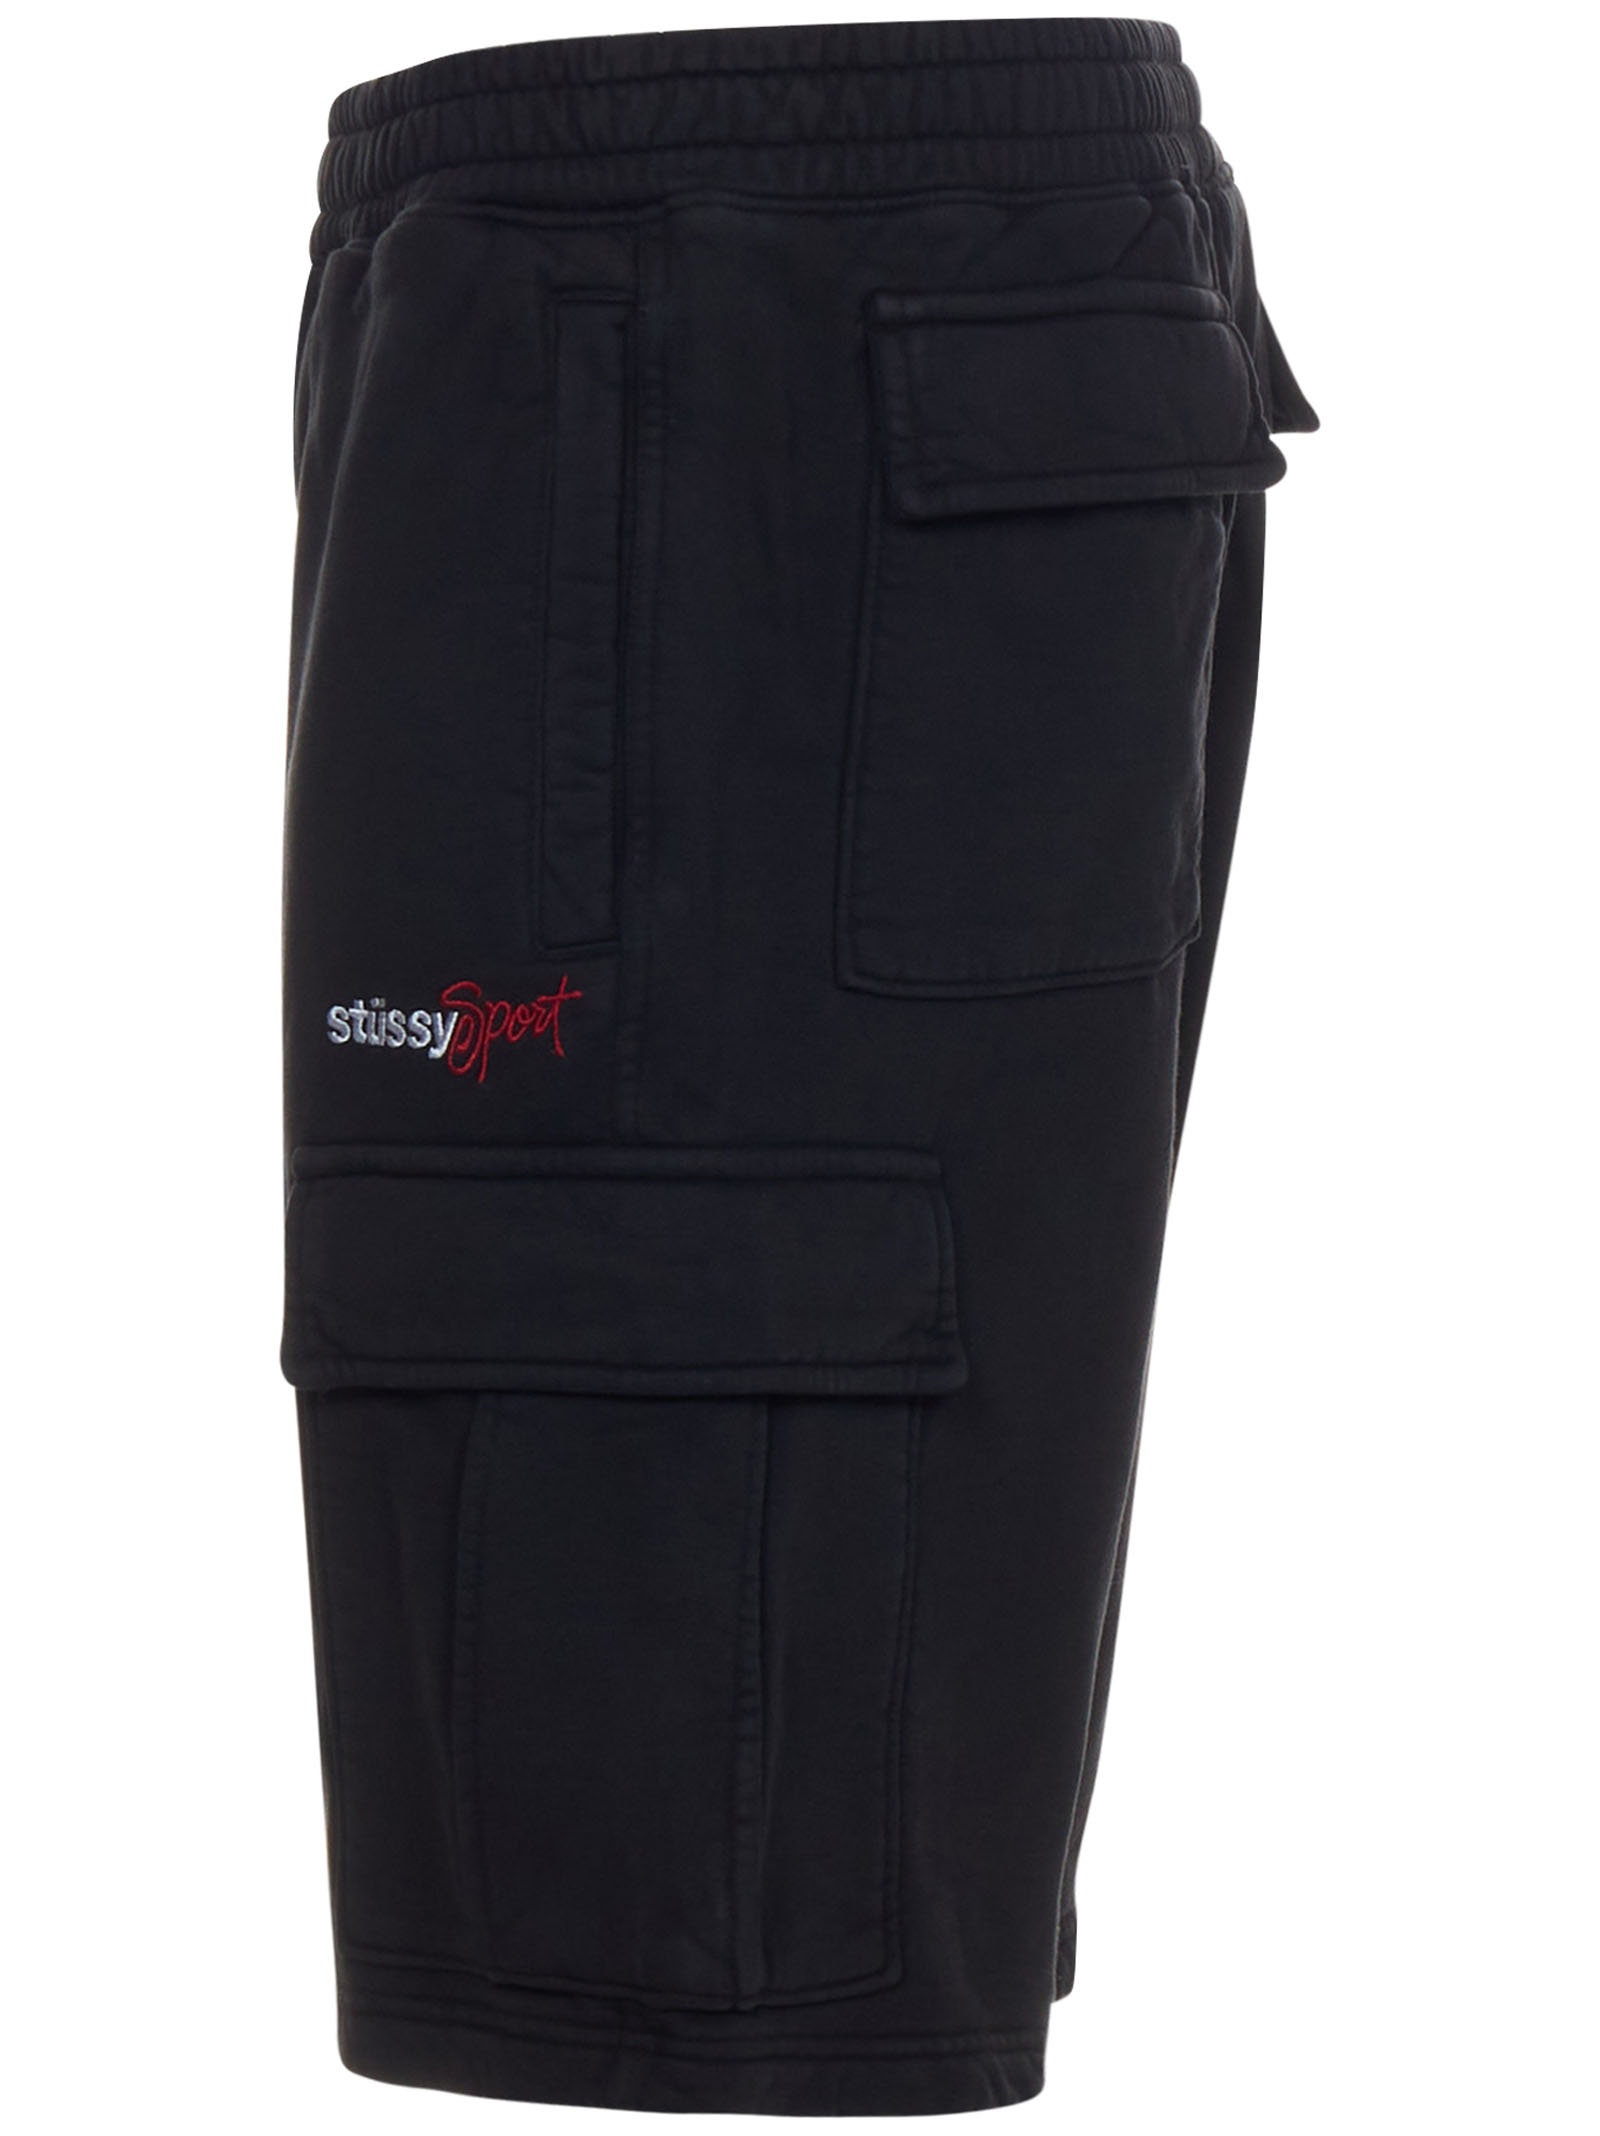 Sports cargo shorts in black cotton with contrasting logo embroidery on the left leg. - 3